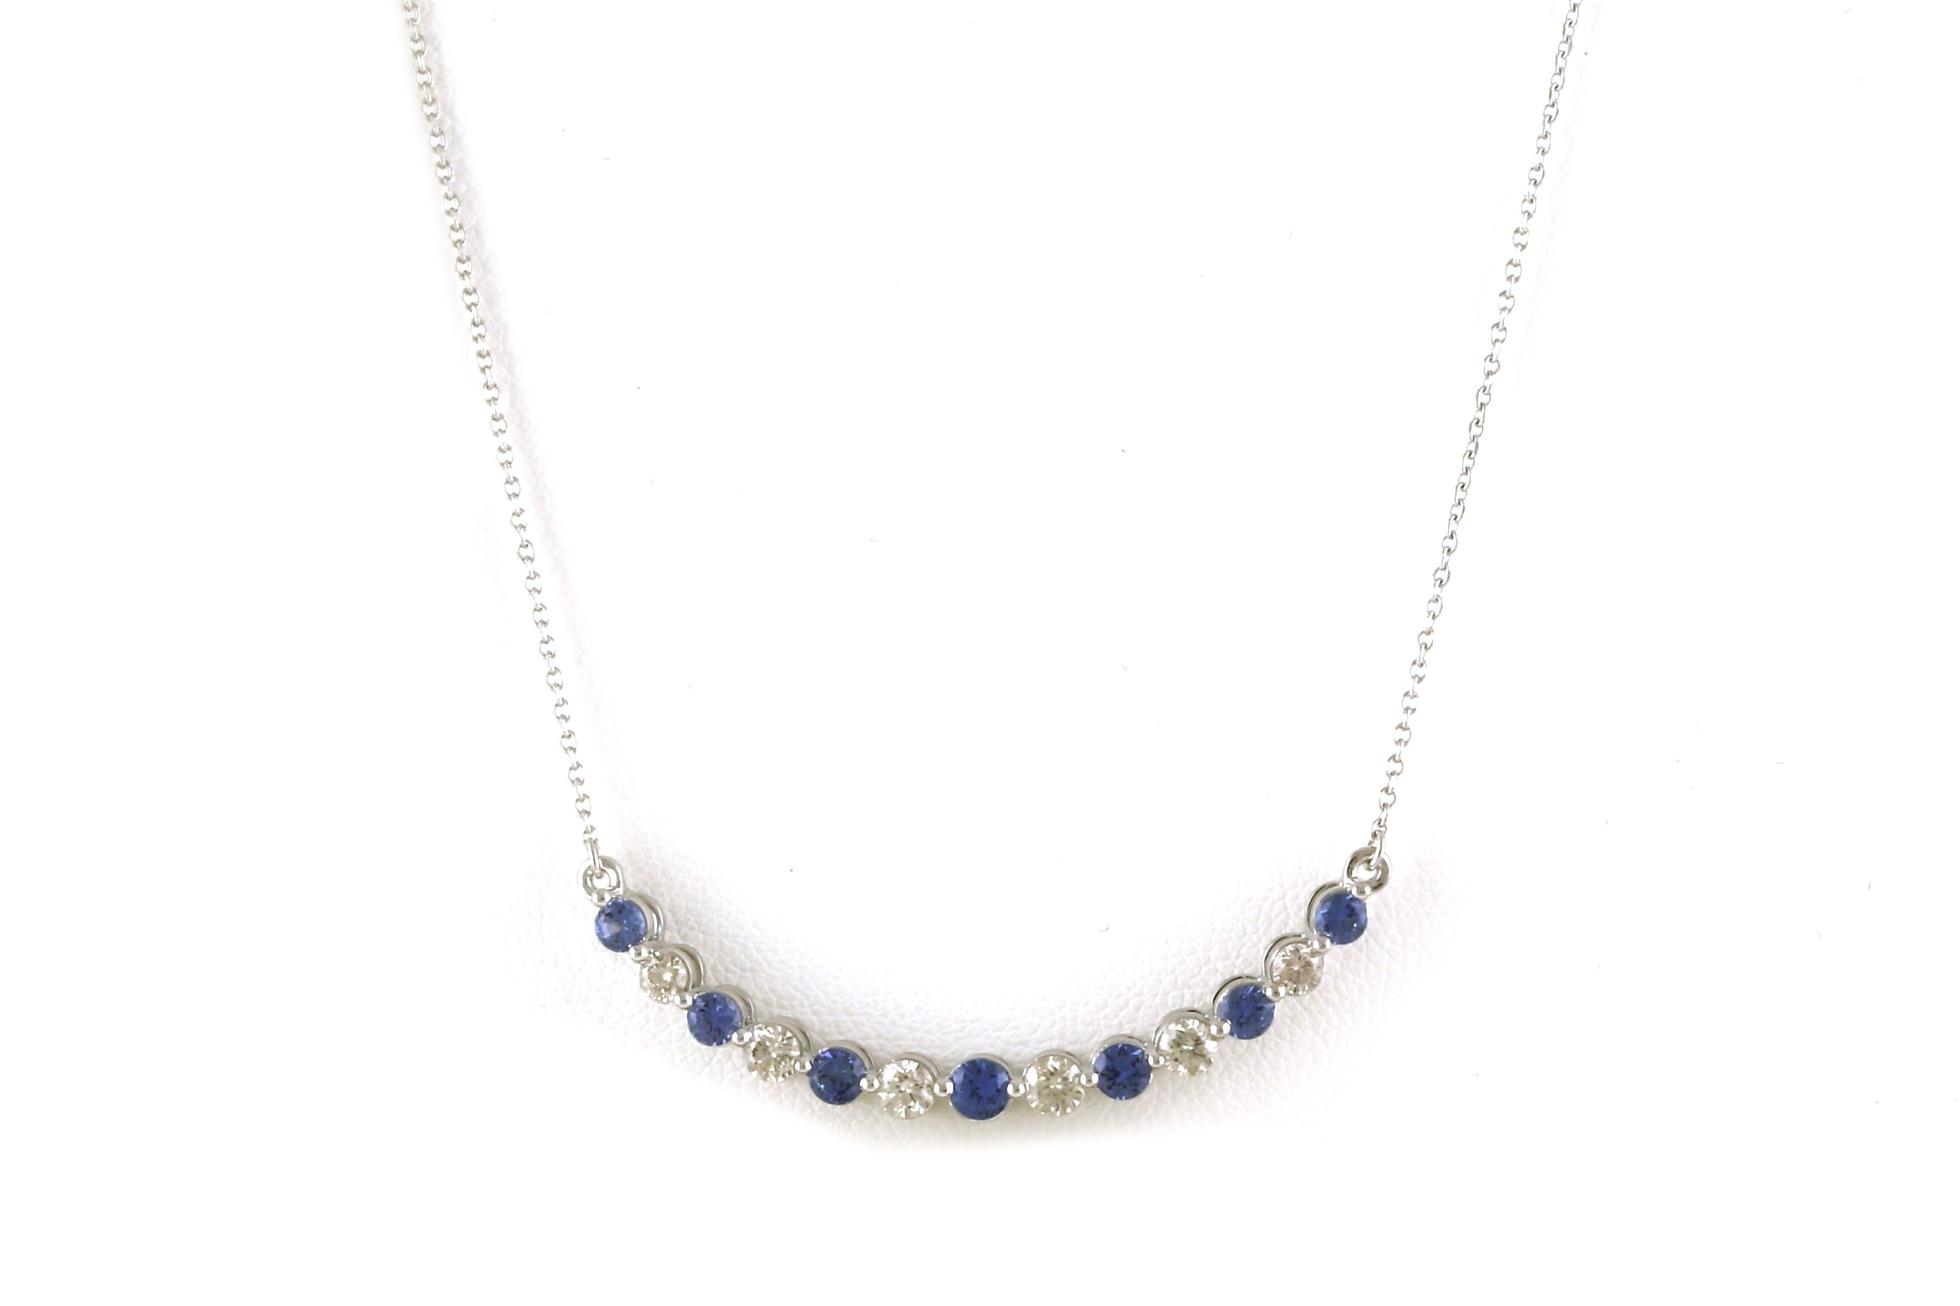 Share-prong Curved Bar Montana Yogo Sapphire and Diamond Necklace (0.95cts TWT)